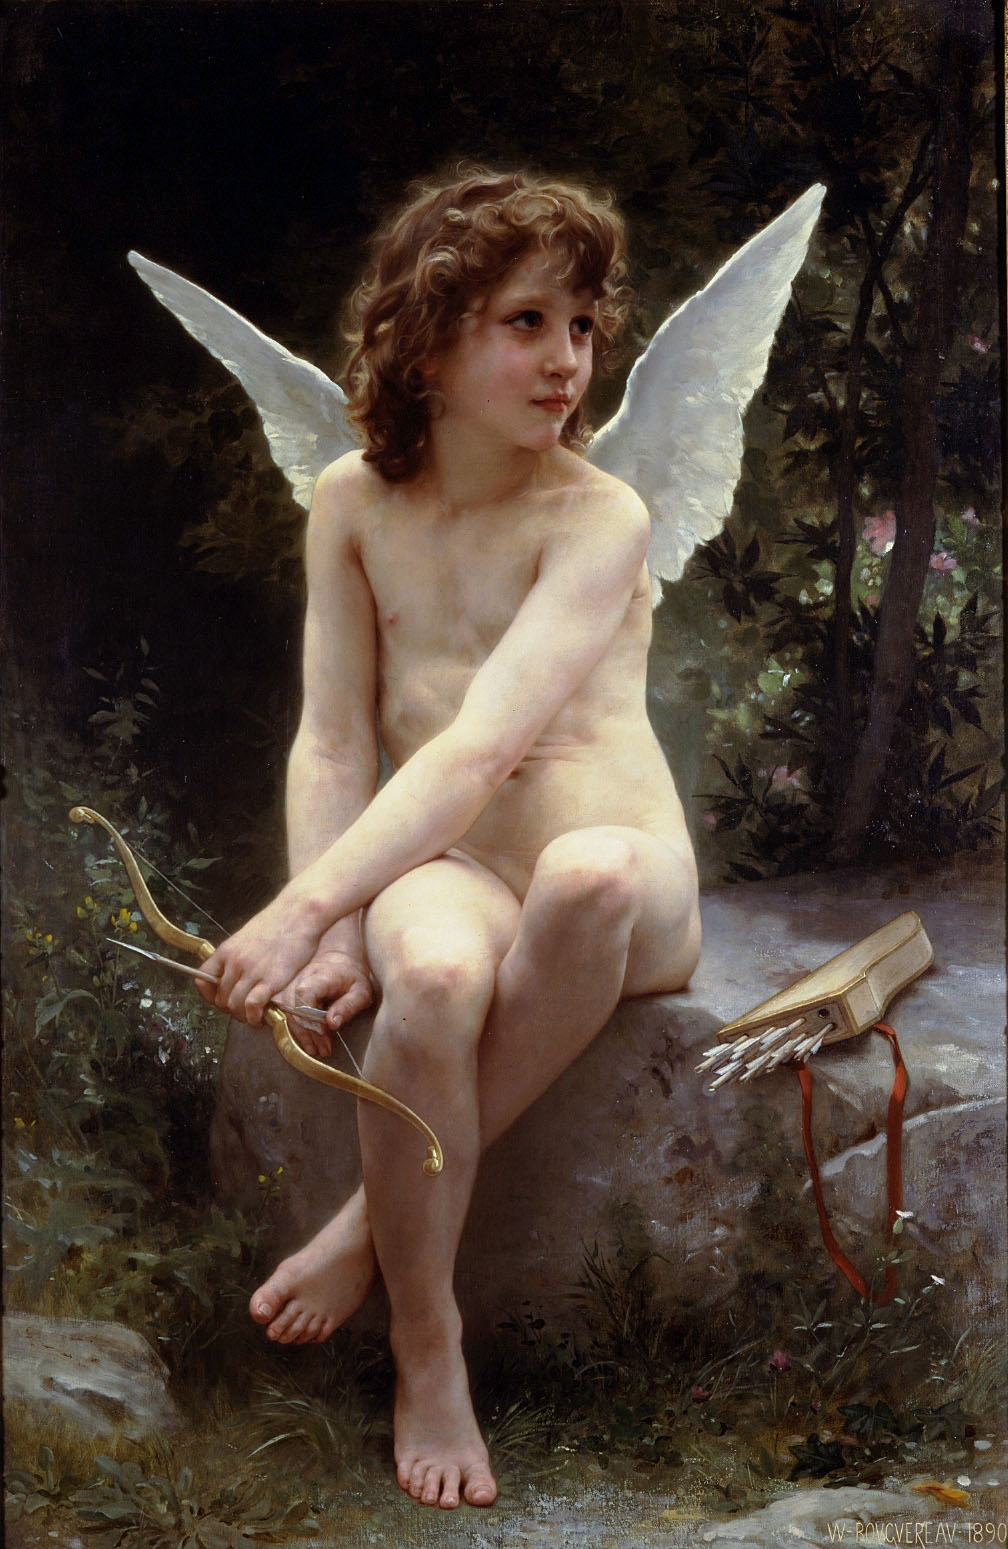 [William-Adolphe_Bouguereau_(1825-1905)_-_Love_on_the_Look_Out_(1890).jpg]